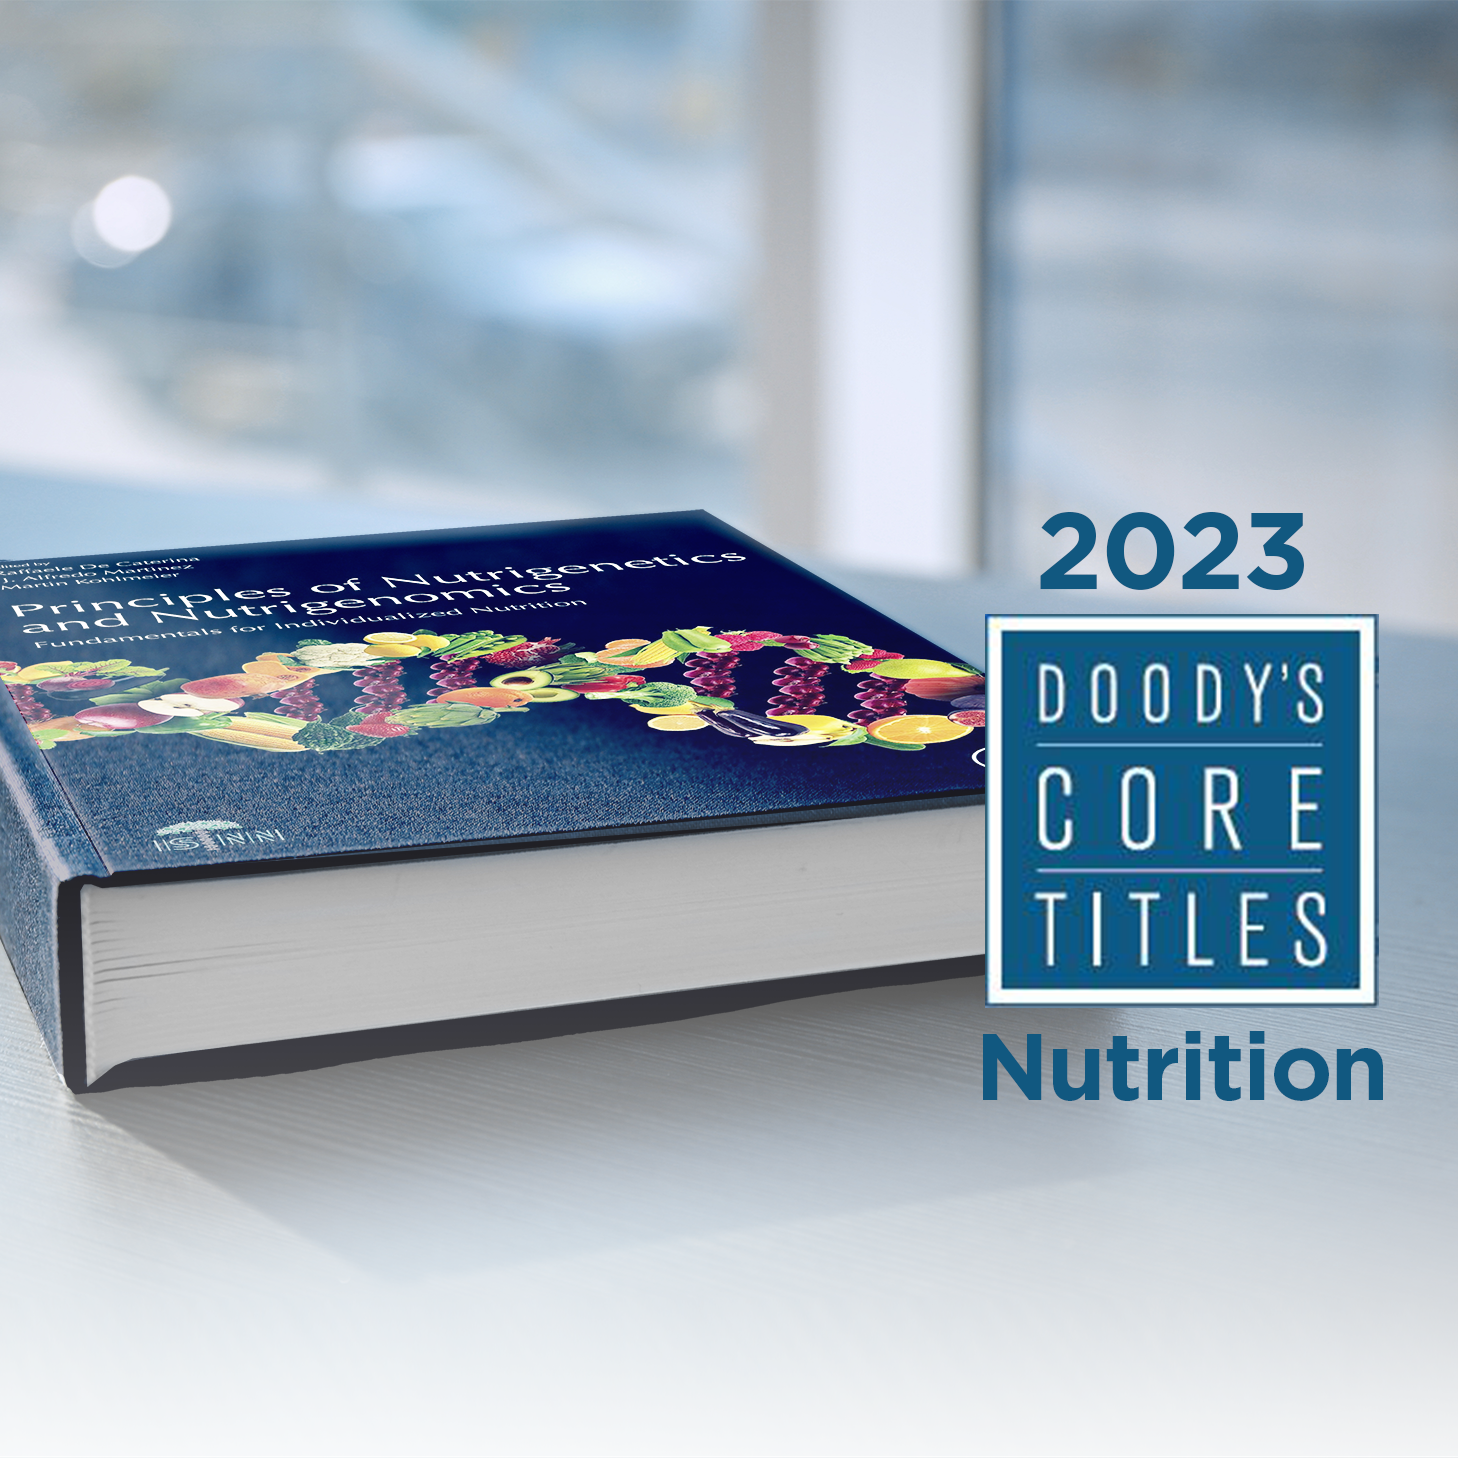 Kohlmeier Co-edited Textbook selected as Core Title in Nutrition